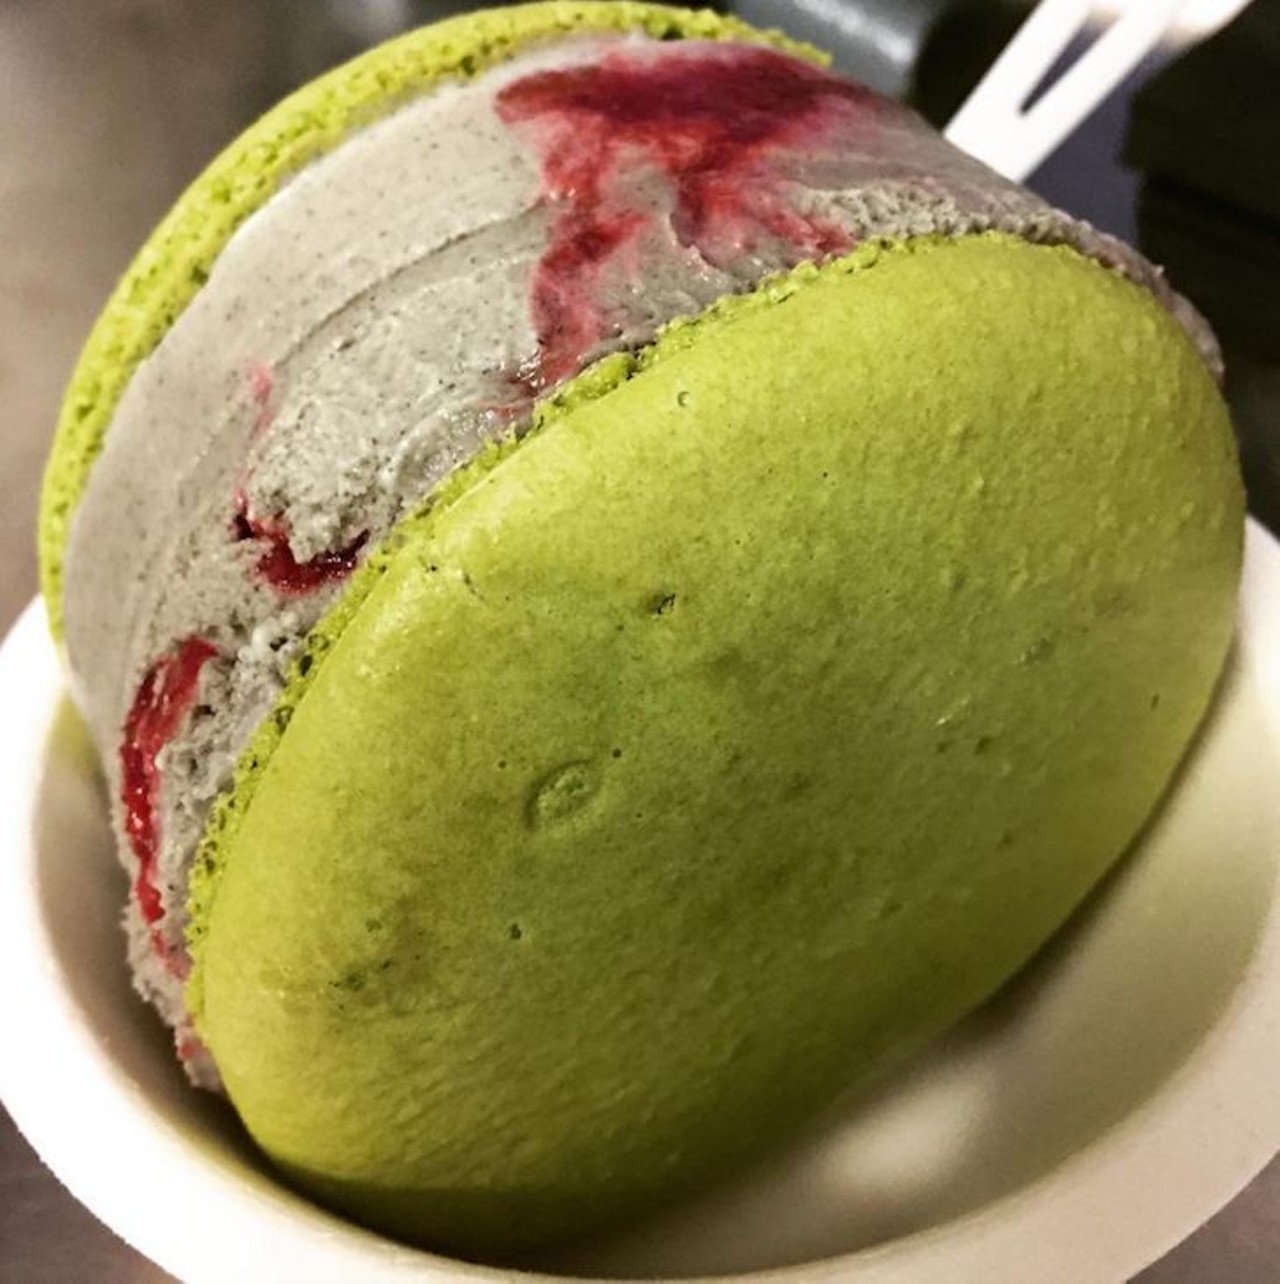 Sesame Raspberry Swirl Ice Cream on Matcha Macarons at Midnight Sun Ice Cream Sandwich Food Truck 
Multiple locations 
Authentic and made with local ingredients, these ice cream sandwiches can come on cookies or macarons. Perusing Midnight Sun&#146;s Instagram will create some serious cravings, which can be fixed up with the Sesame Raspberry Swirl Ice Cream on Matcha Macarons. You can find them every Tuesday at the Tasty Takeover in the Milk District. 
Photo via midnightsunic/Instagram